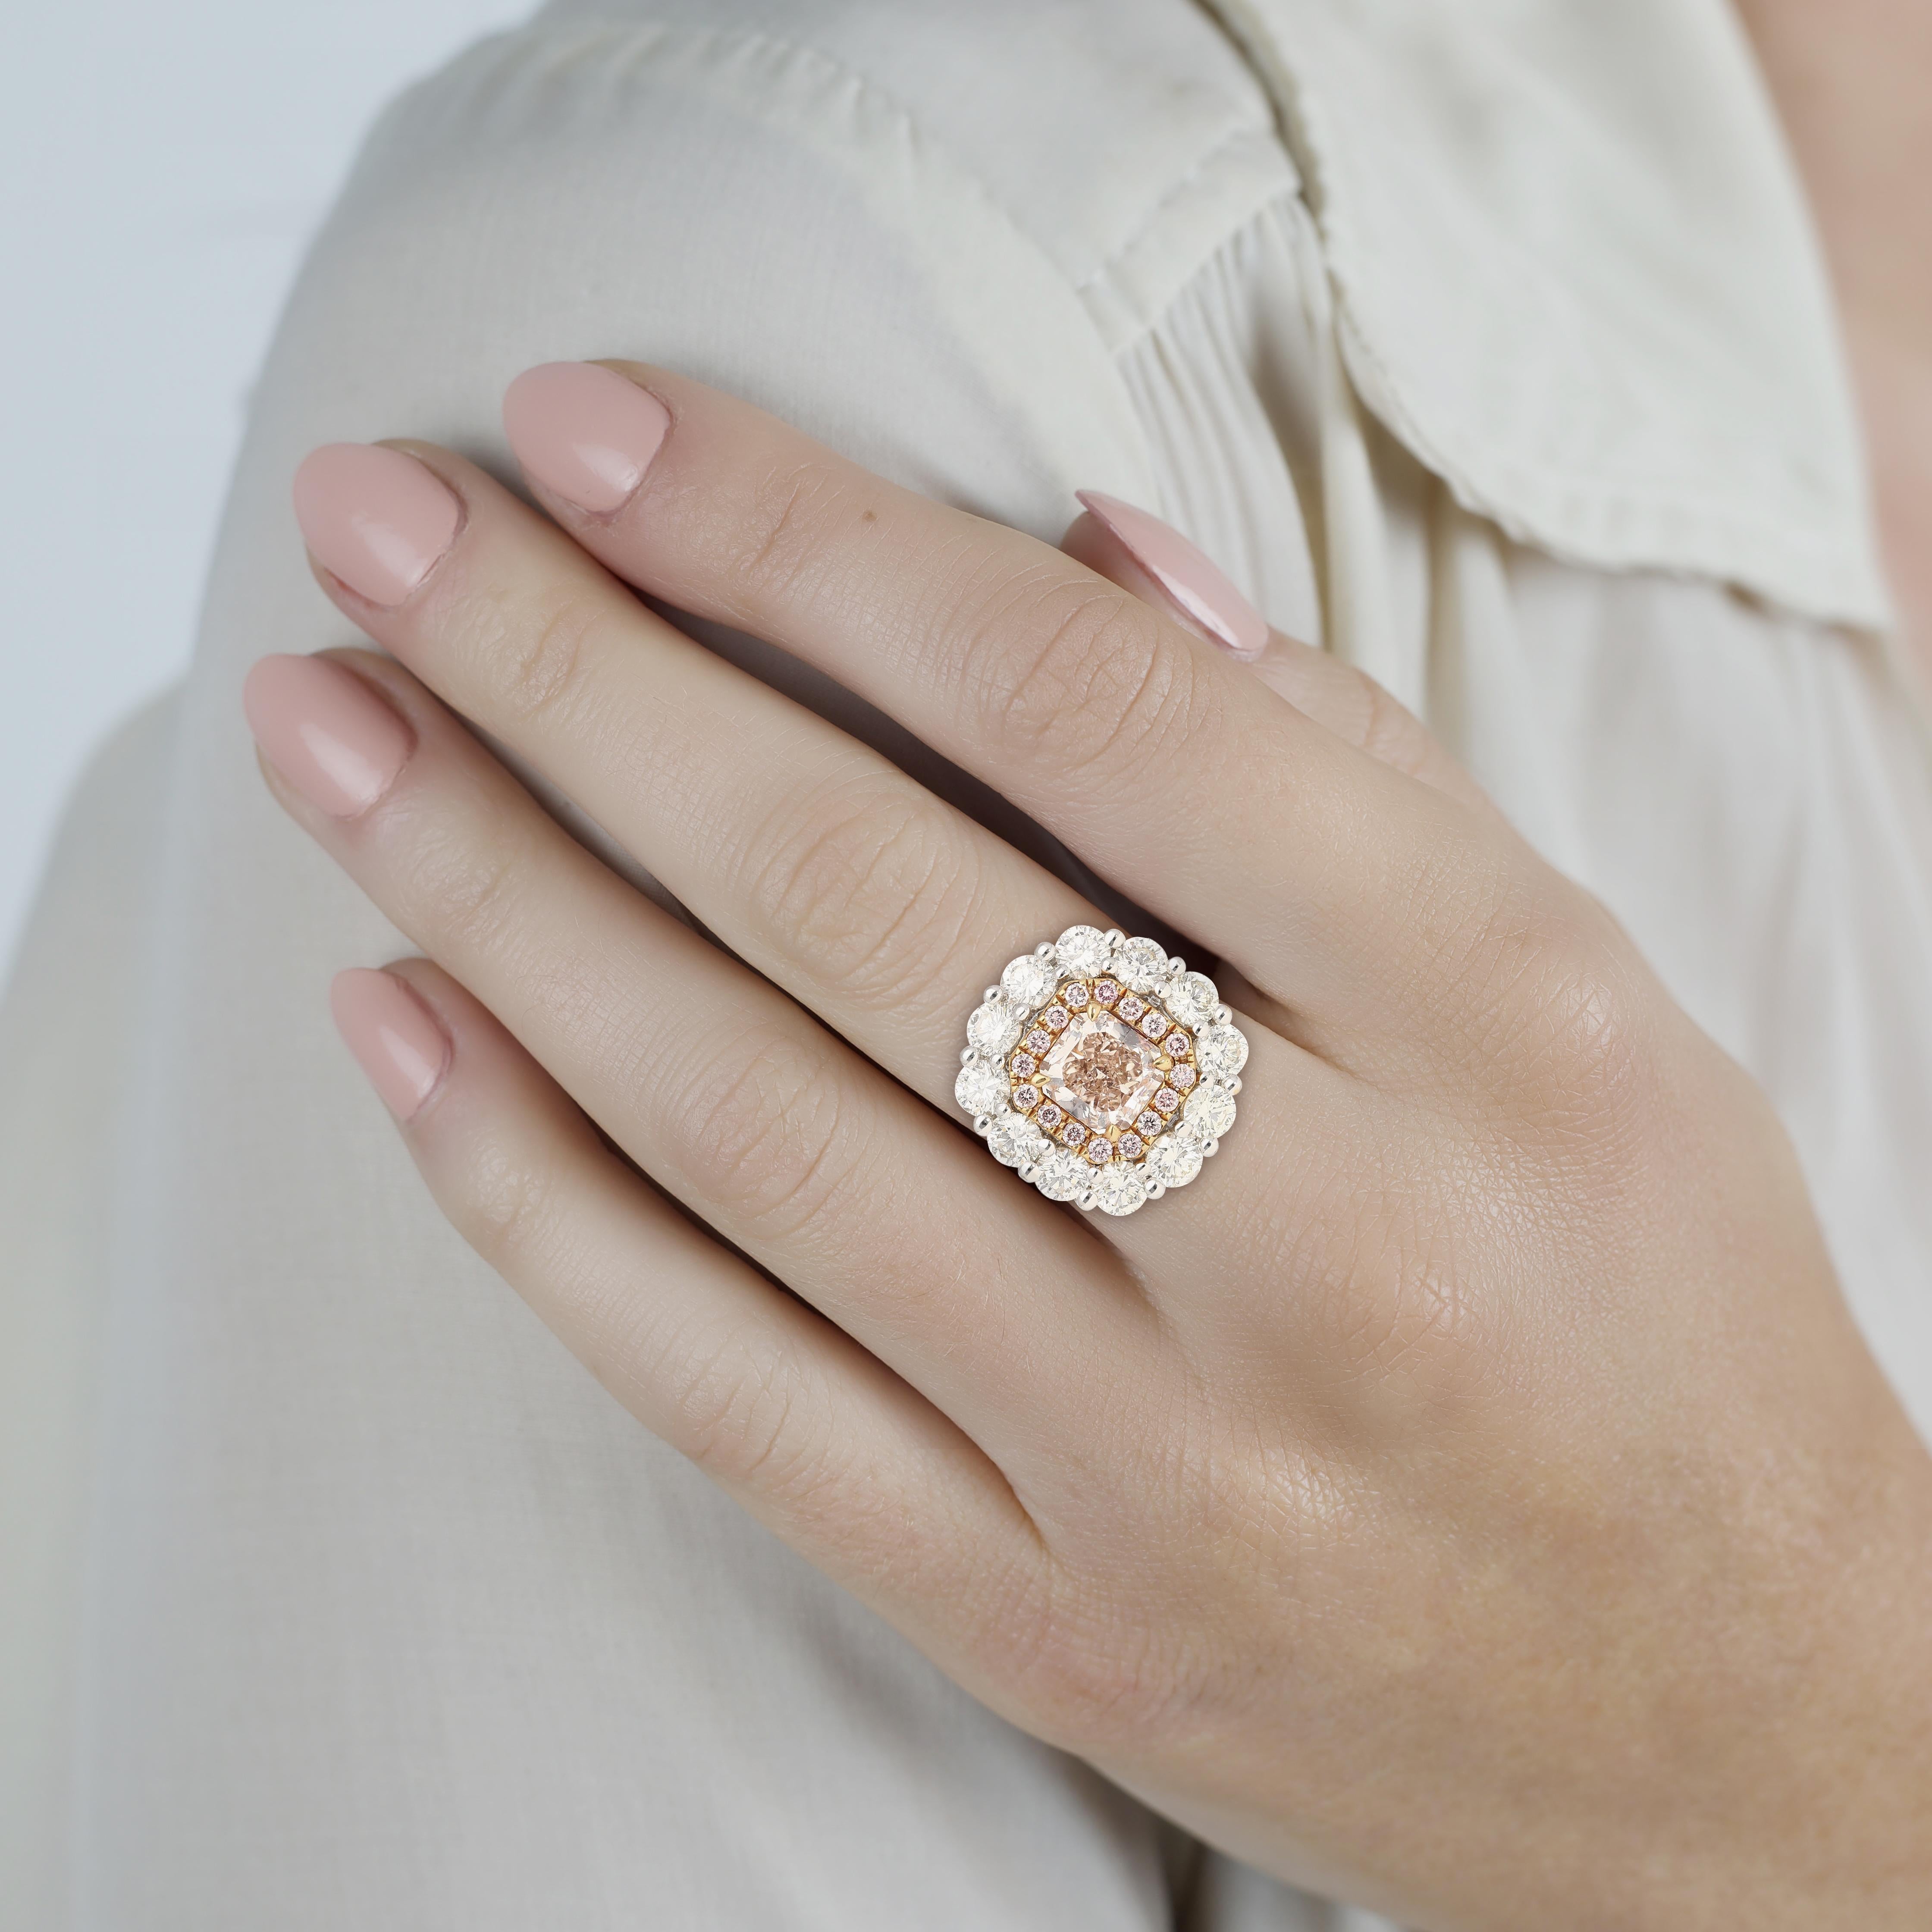 GIA Certified 1.51 Carat Fancy Light Brown Pink Internally Flawless Diamond Ring In New Condition For Sale In Miami, FL